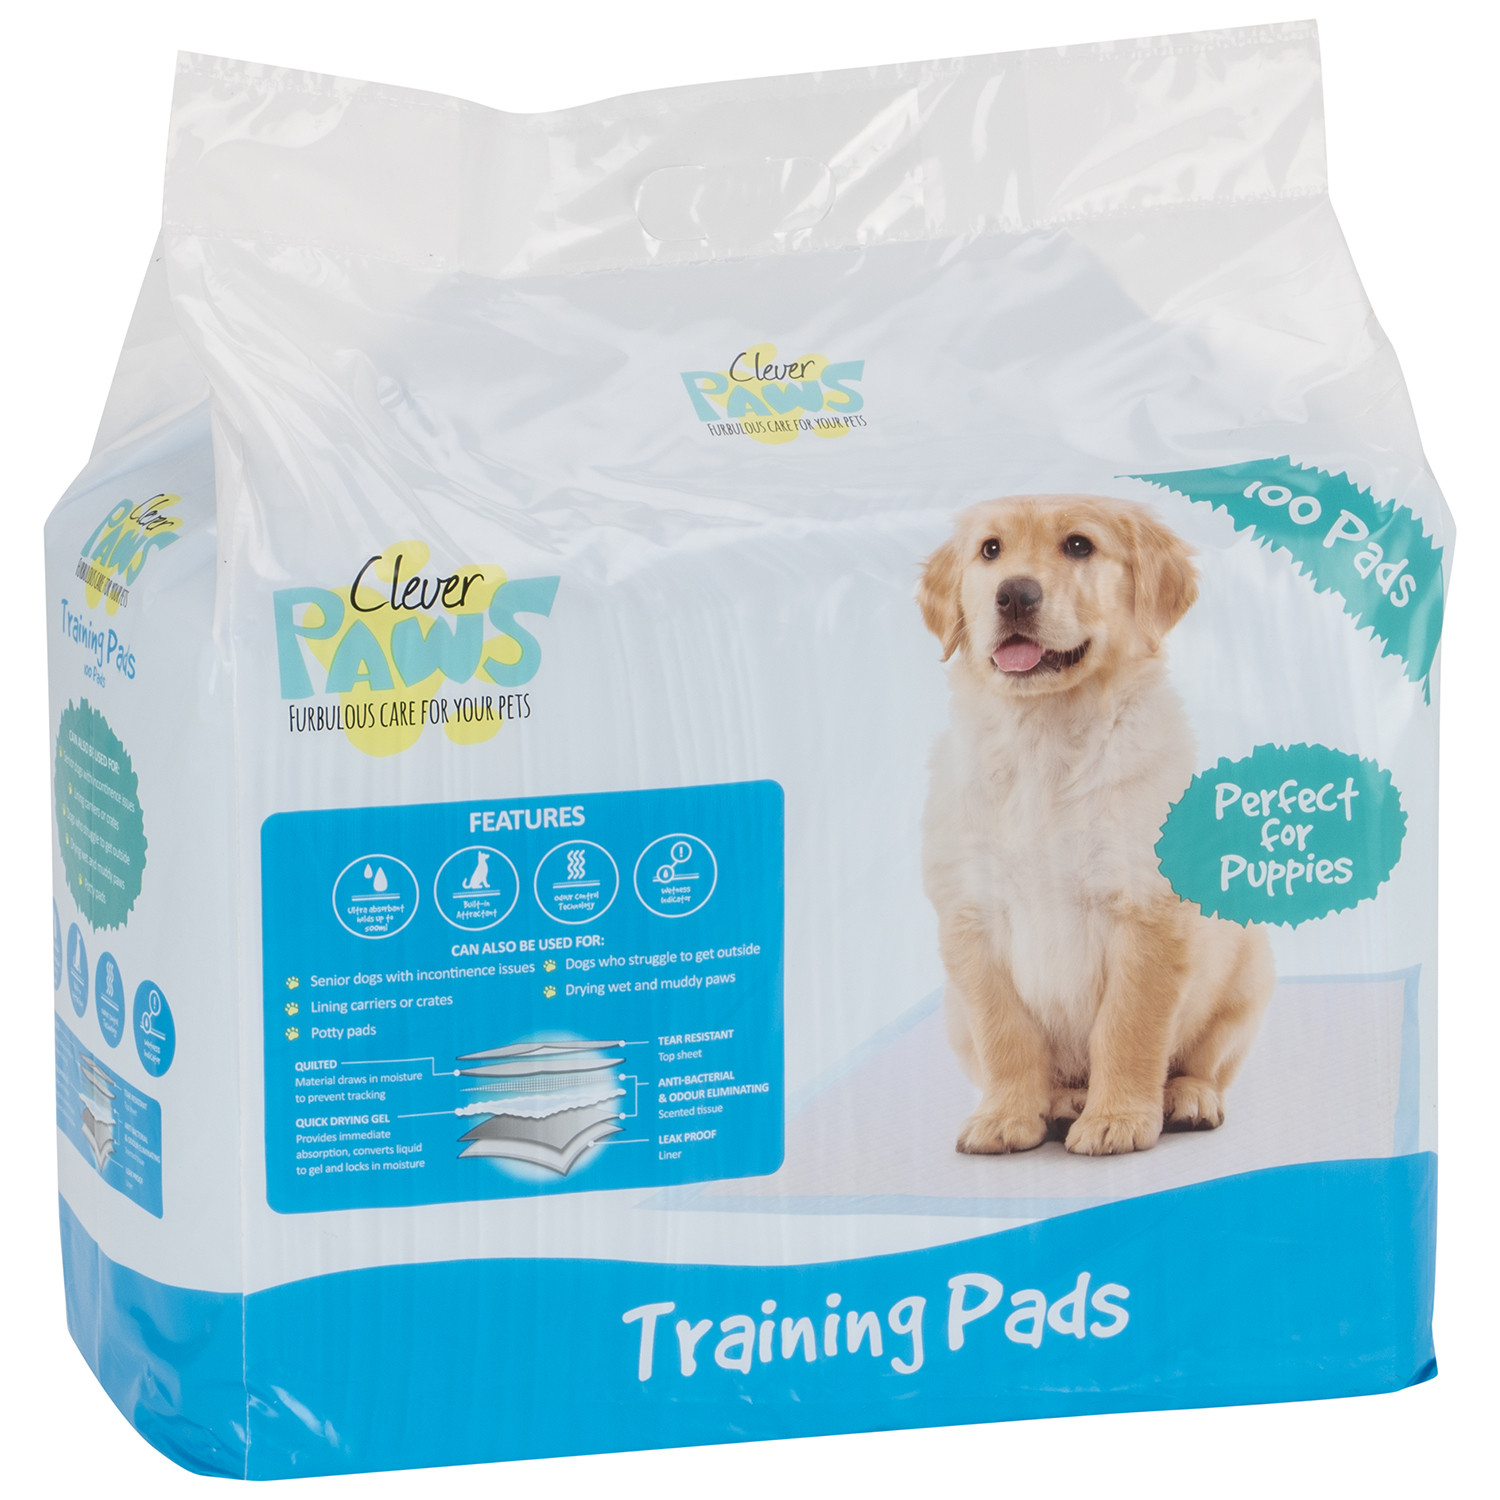 Clever Paws Puppy Training Pads 100 Pack Image